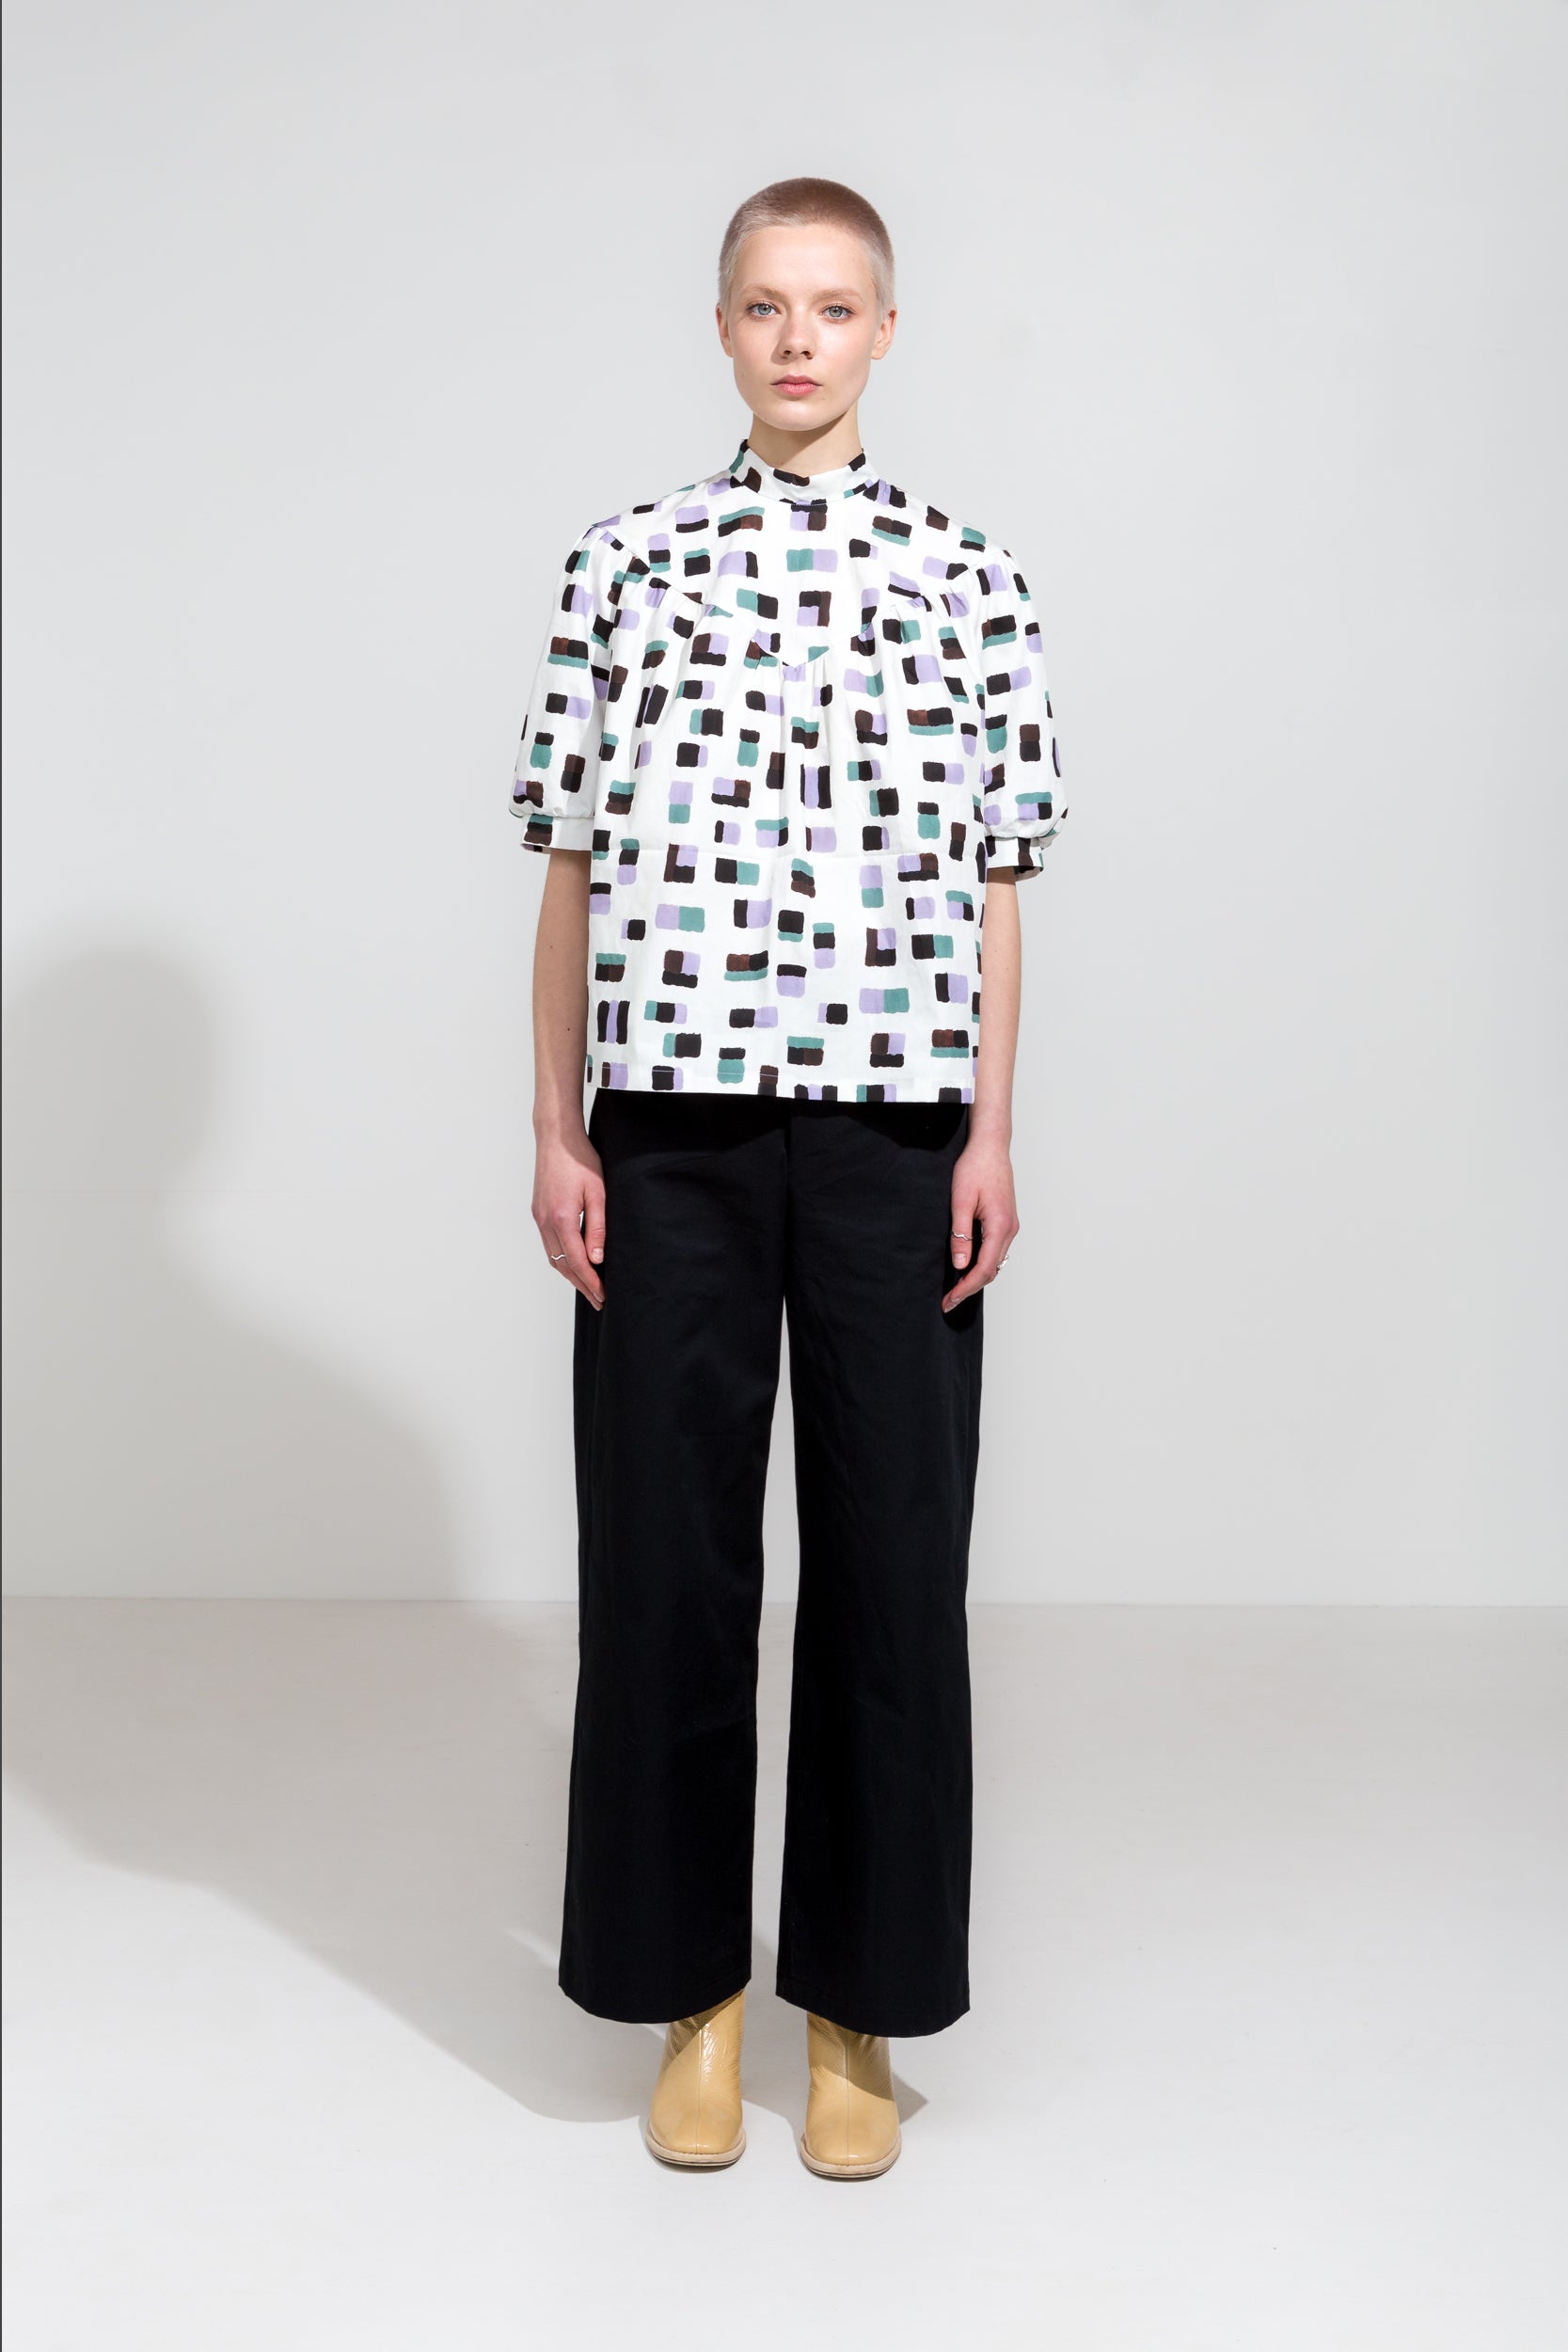 Puff sleeve shirt in print with high collar and black organic cotton workwear pants